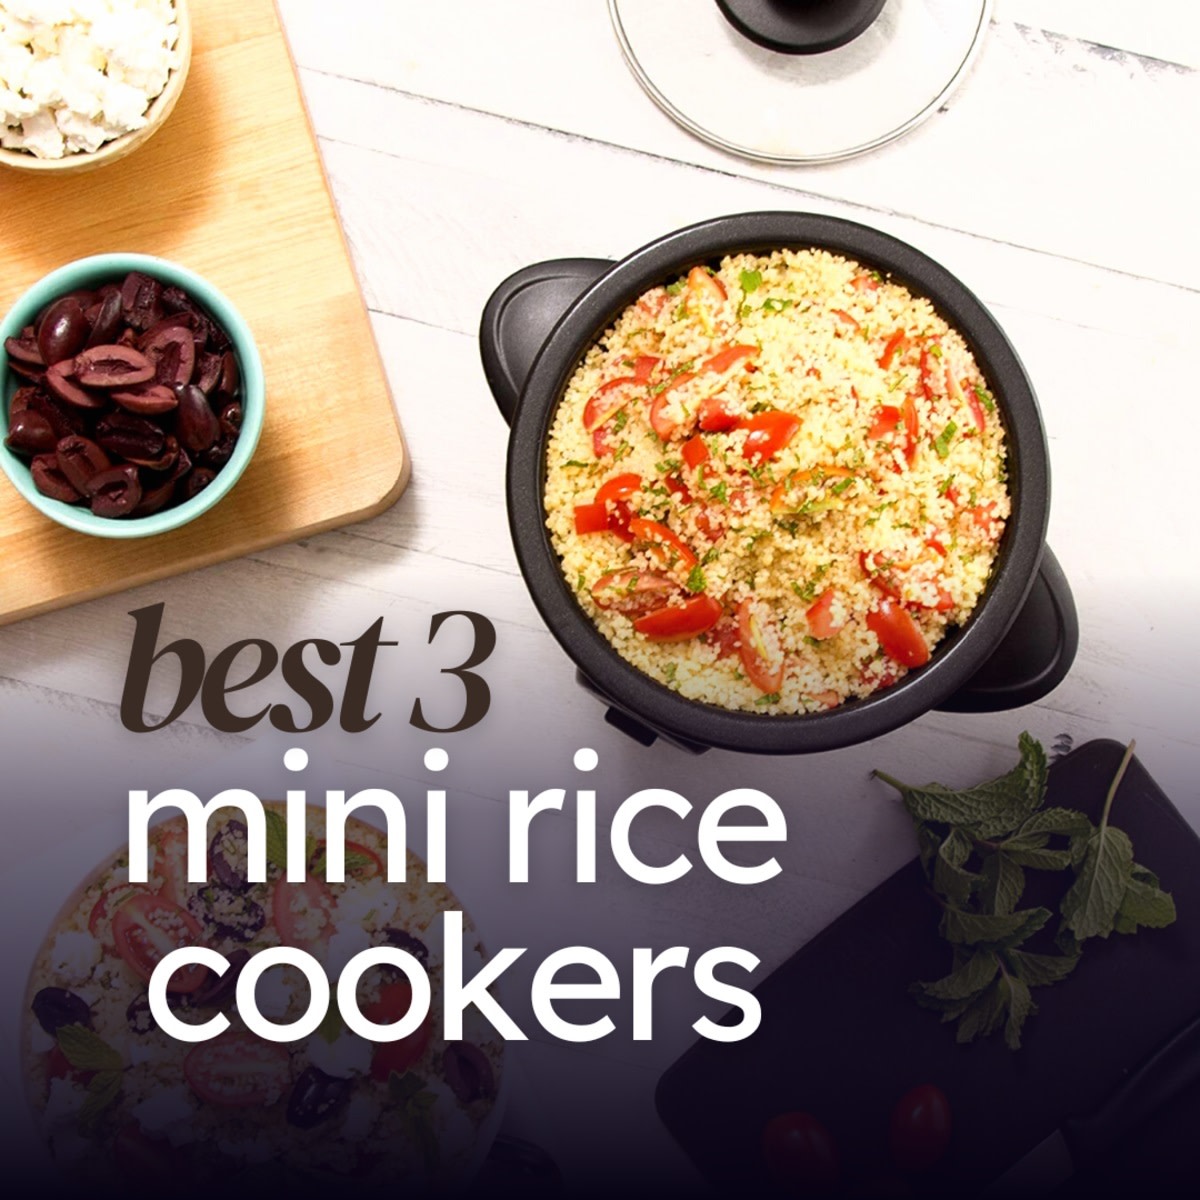 Mishcdea Small Rice Cooker, Personal Size Cooker for 1-2 People